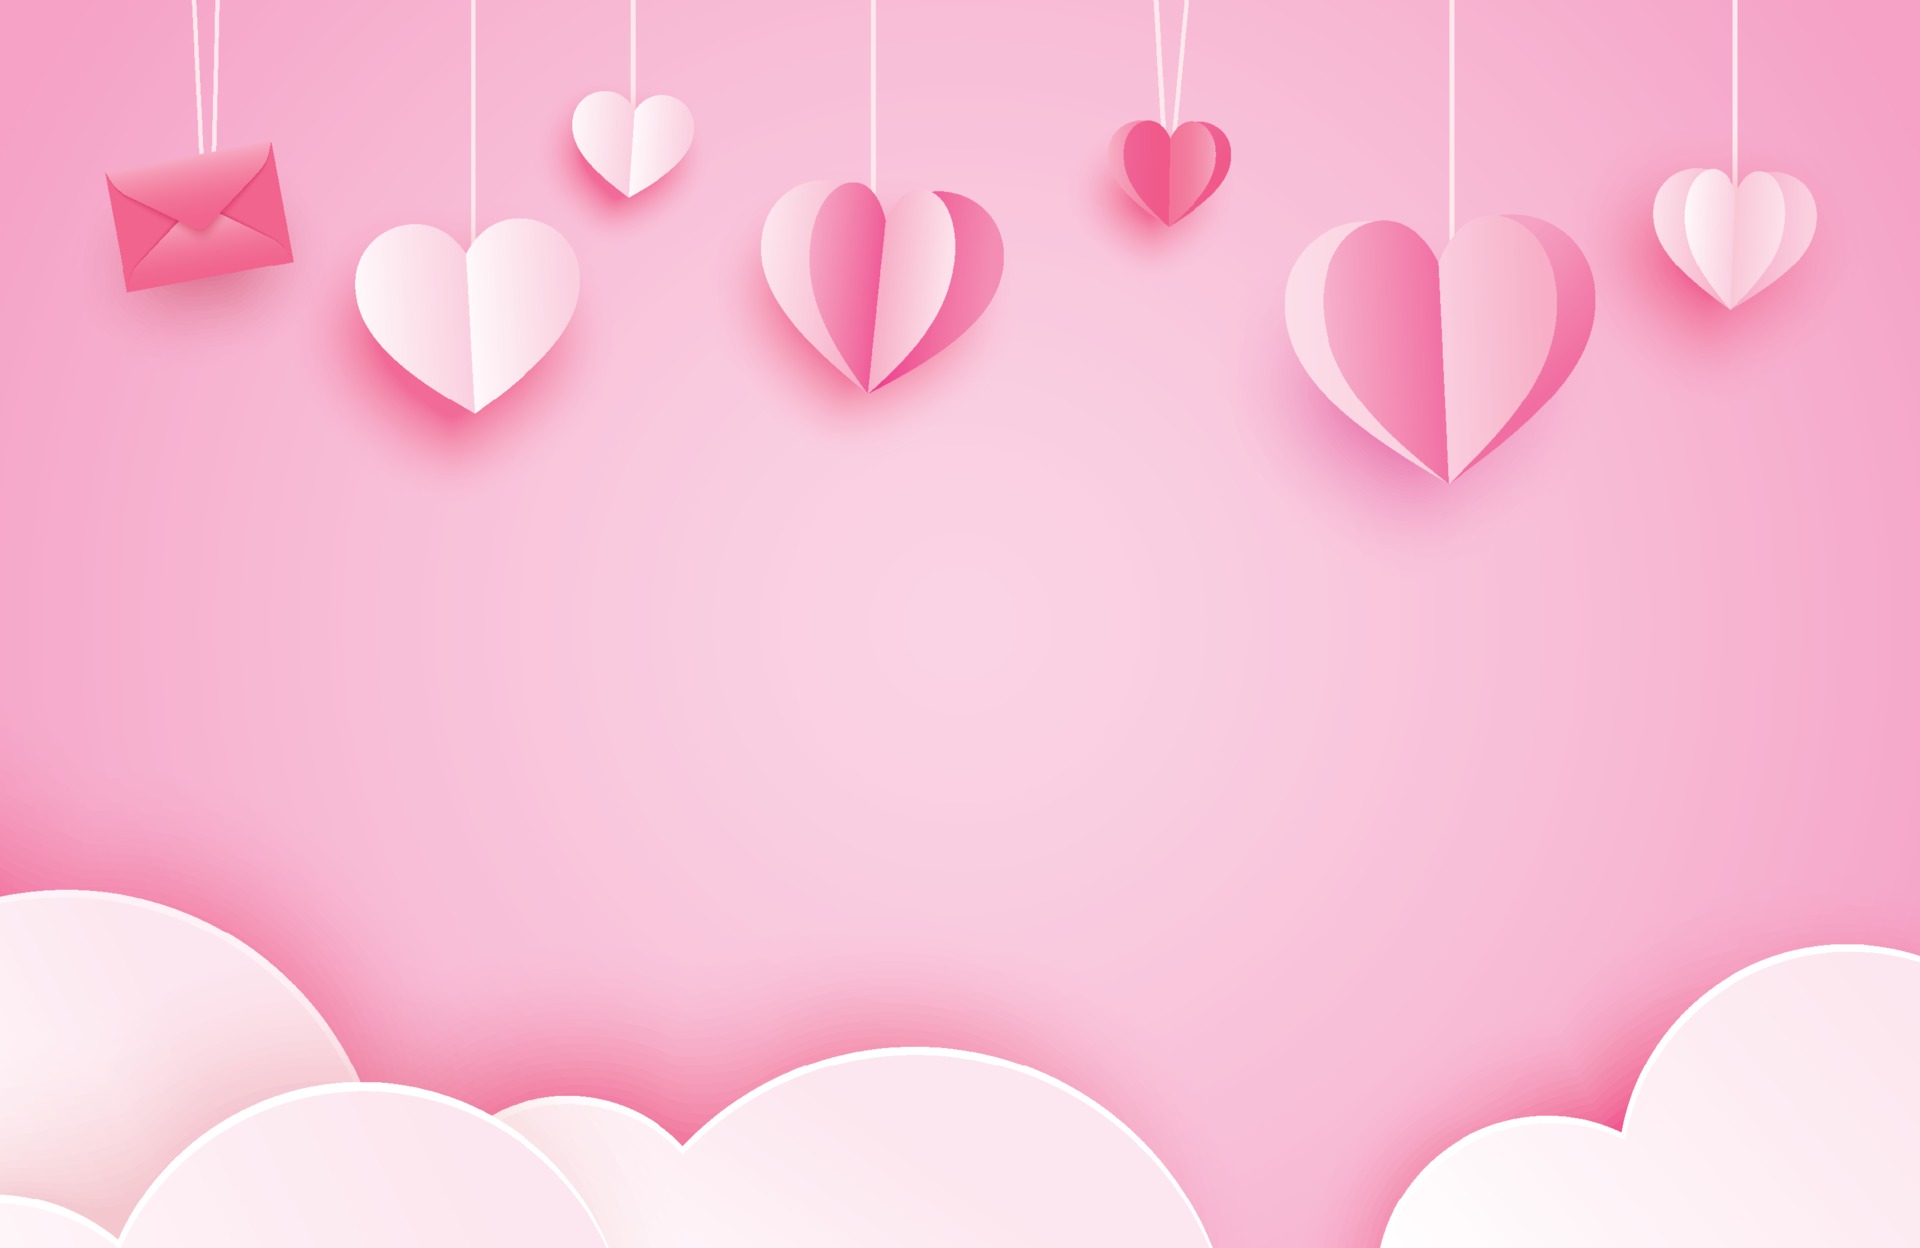 Happy valentines day greeting cards with paper hearts hanging on pink pastel background